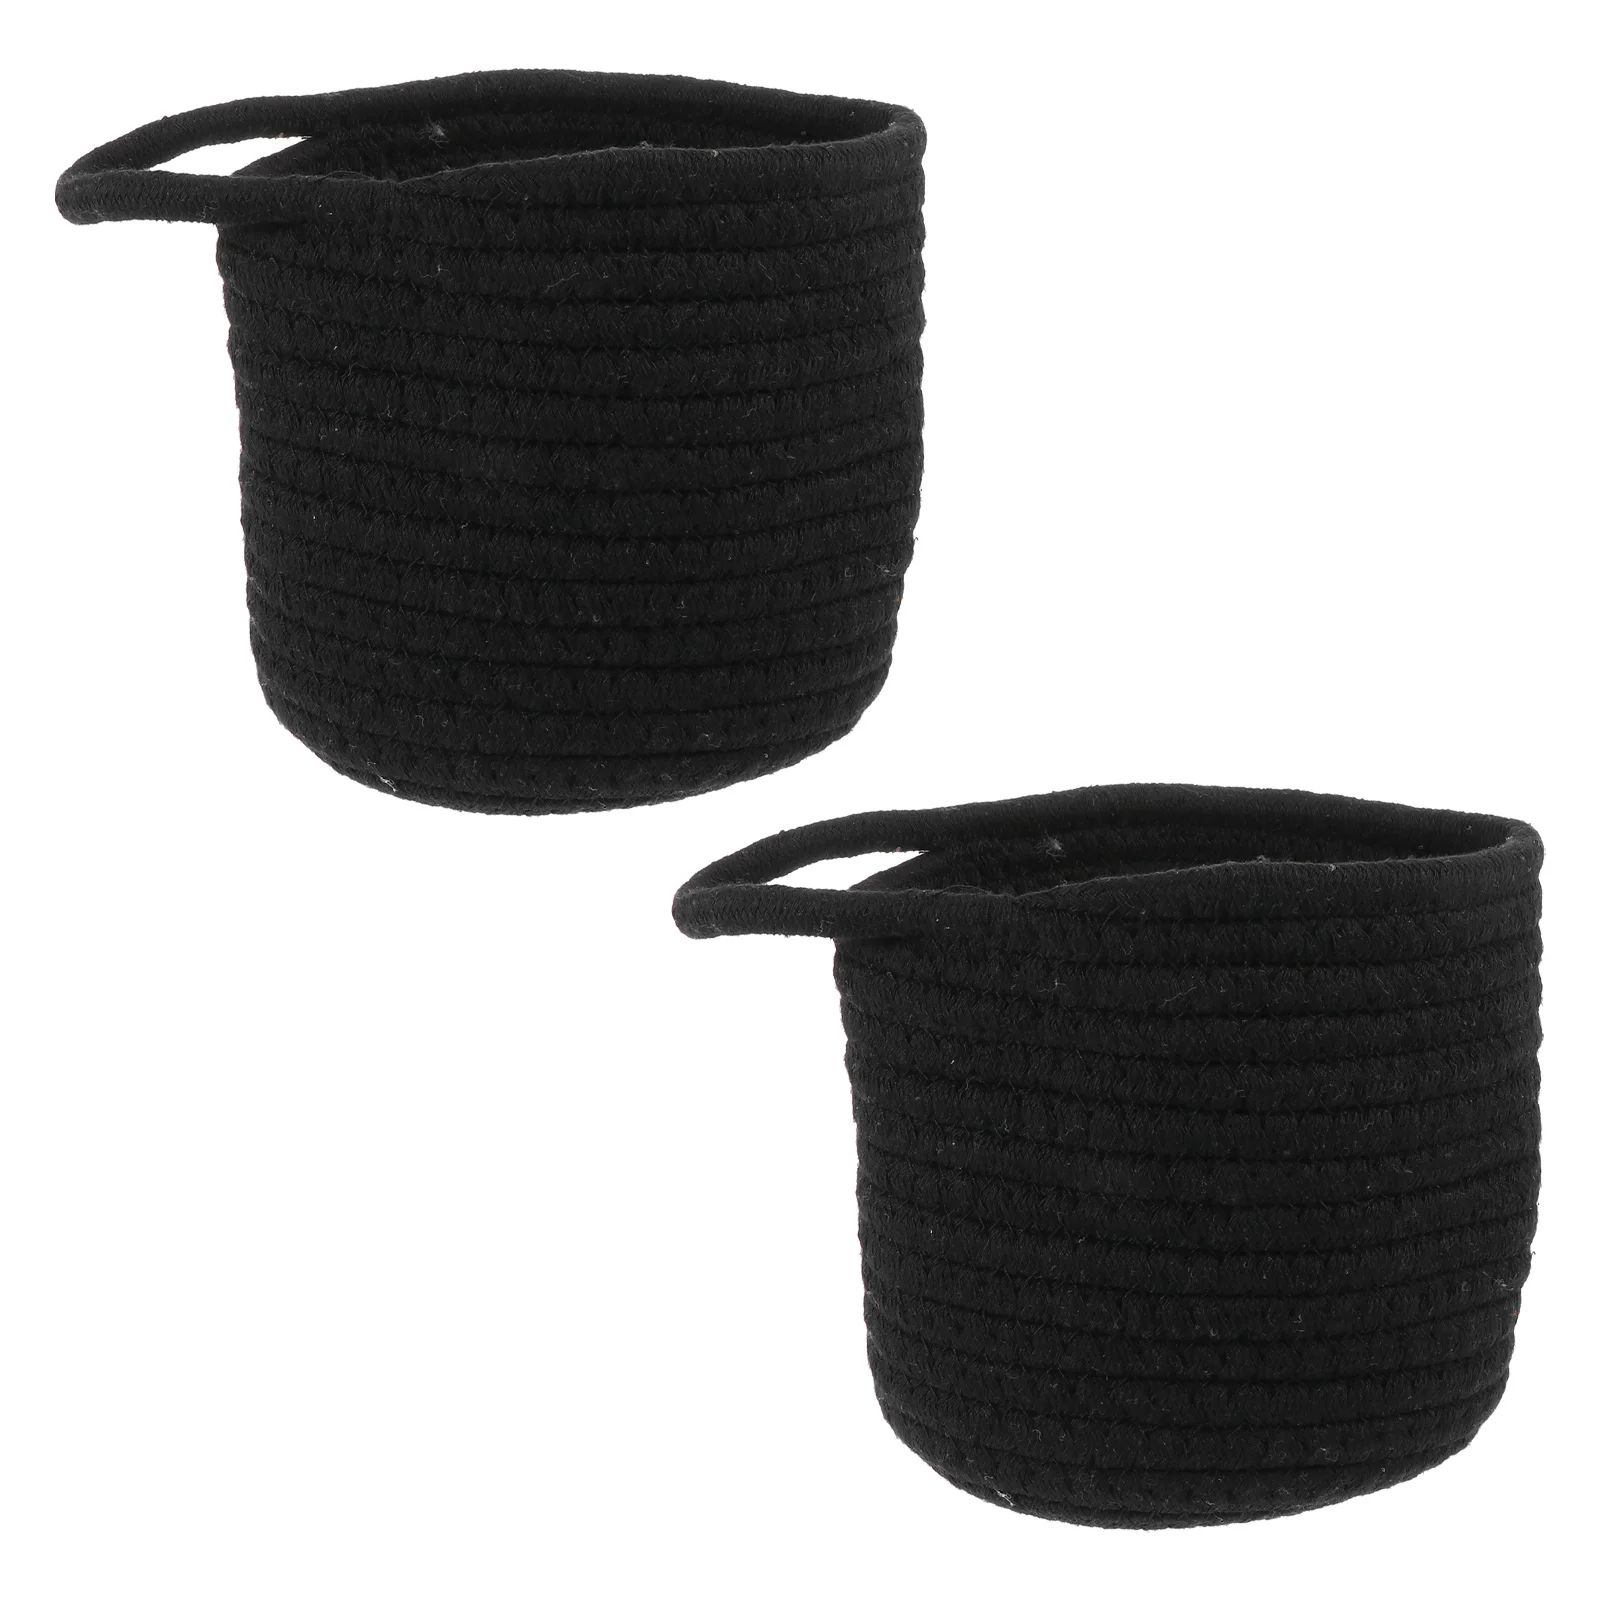 

2 Pcs Cotton Rope Woven Basket Storage Practical Holder Lovely Round Food Rattan Baskets Hand Finishing Items Wooden Household